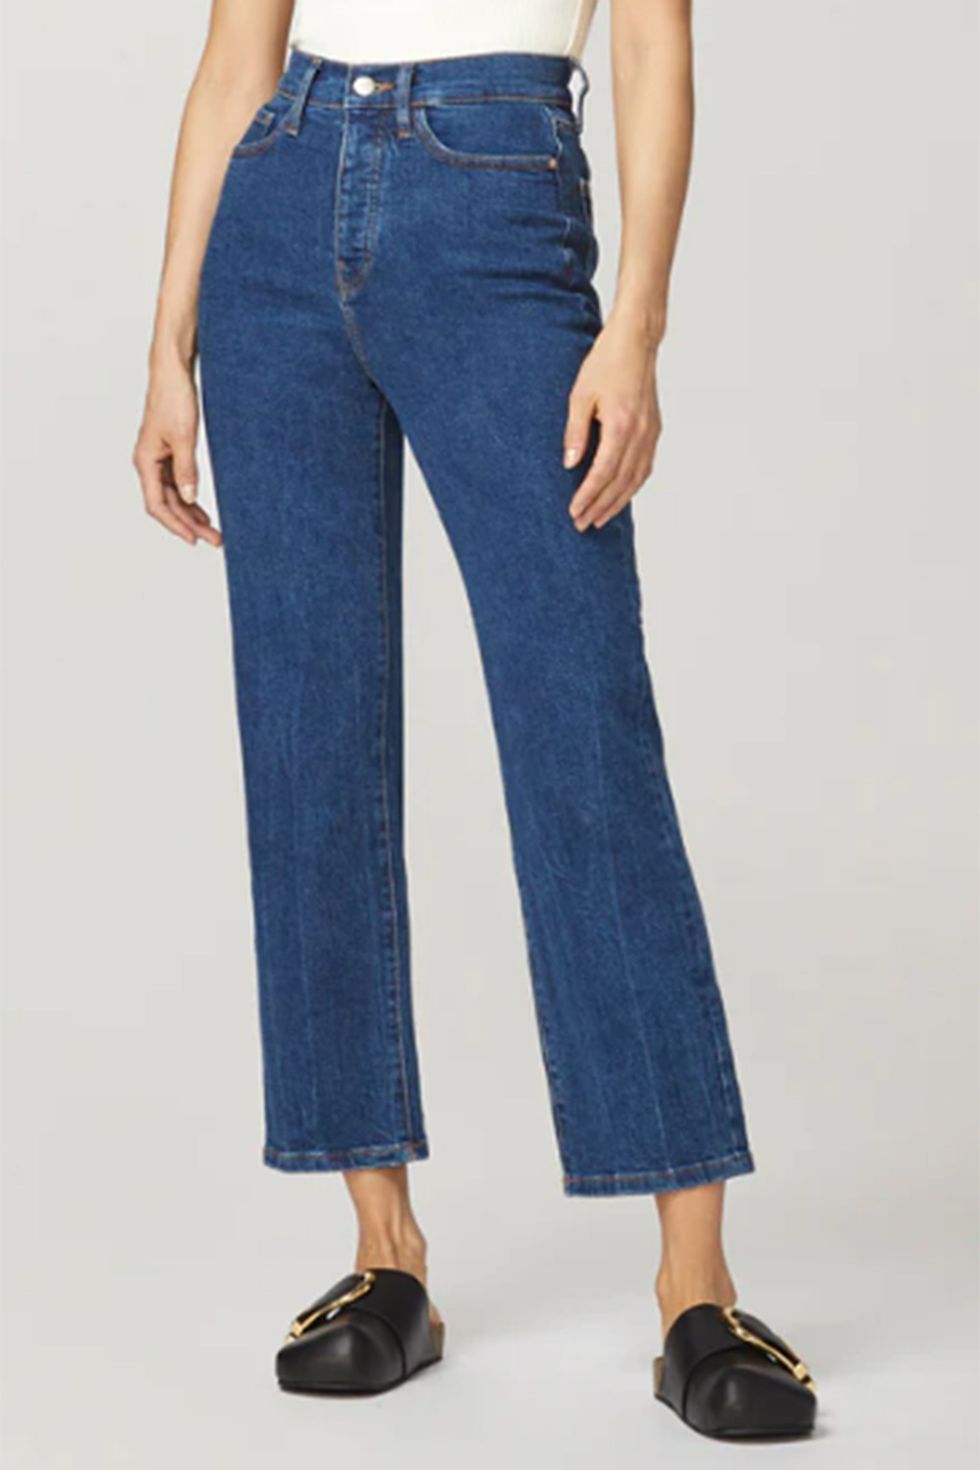 The 18 Best Mom Jeans - 18 FUPA-Defying Pairs of Mom Jeans